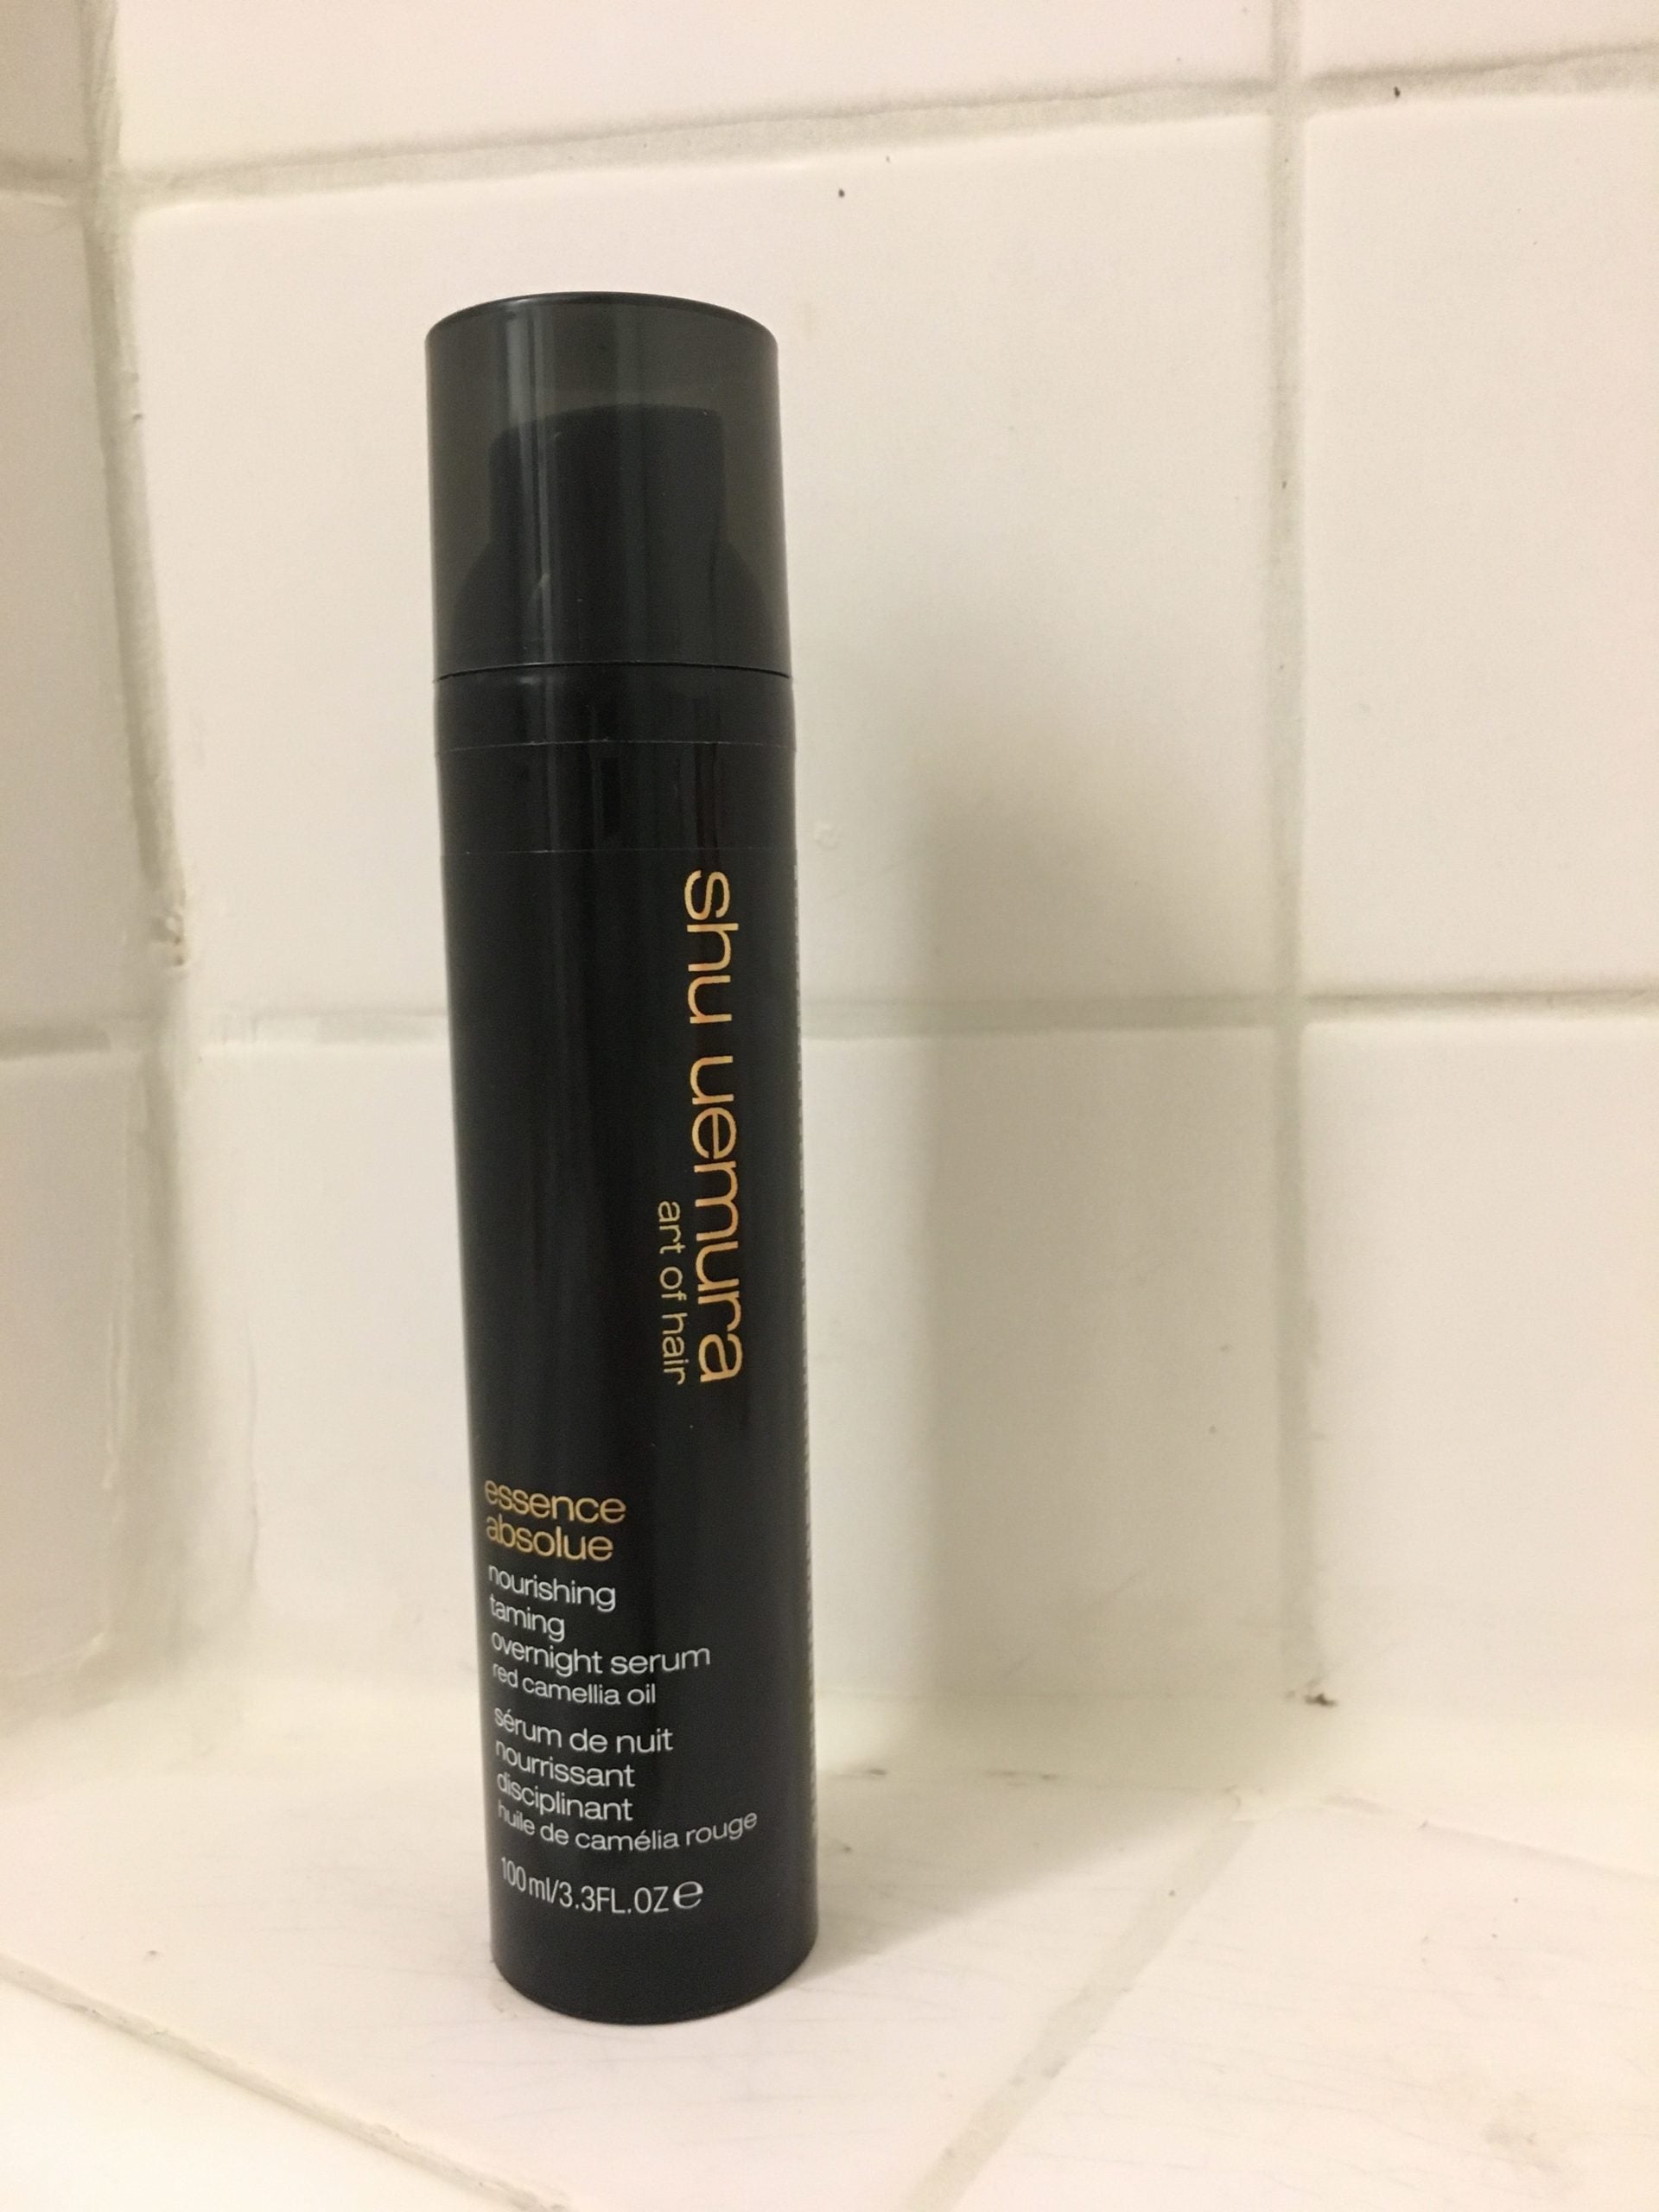 Review, Photos, Ingredients, Hairstyle, Haircare Trend 2018, 2019, 2020: Shu Uemura, Essence Absolue Nourishing Taming Overnight Serum, How To Tame Dry, Frizzy Hair